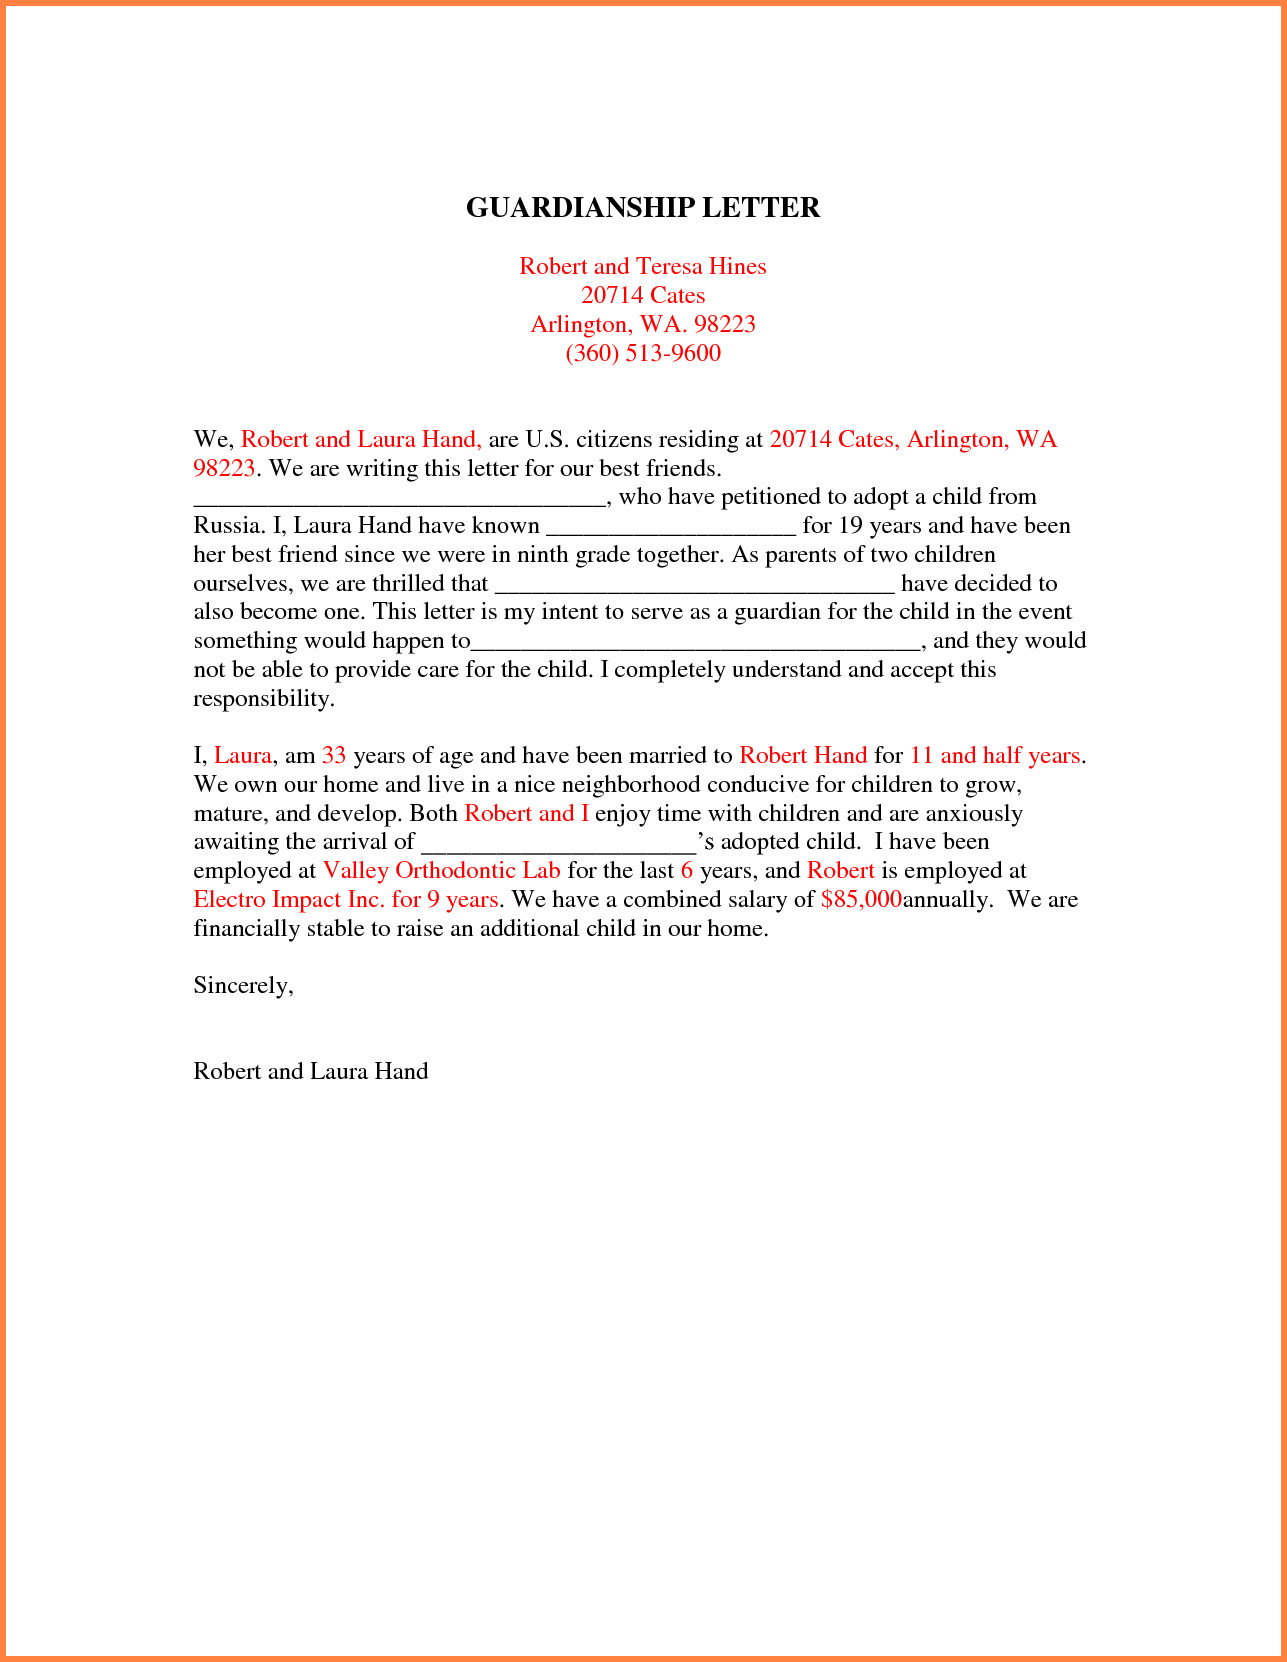 notarized temporary guardianship letter